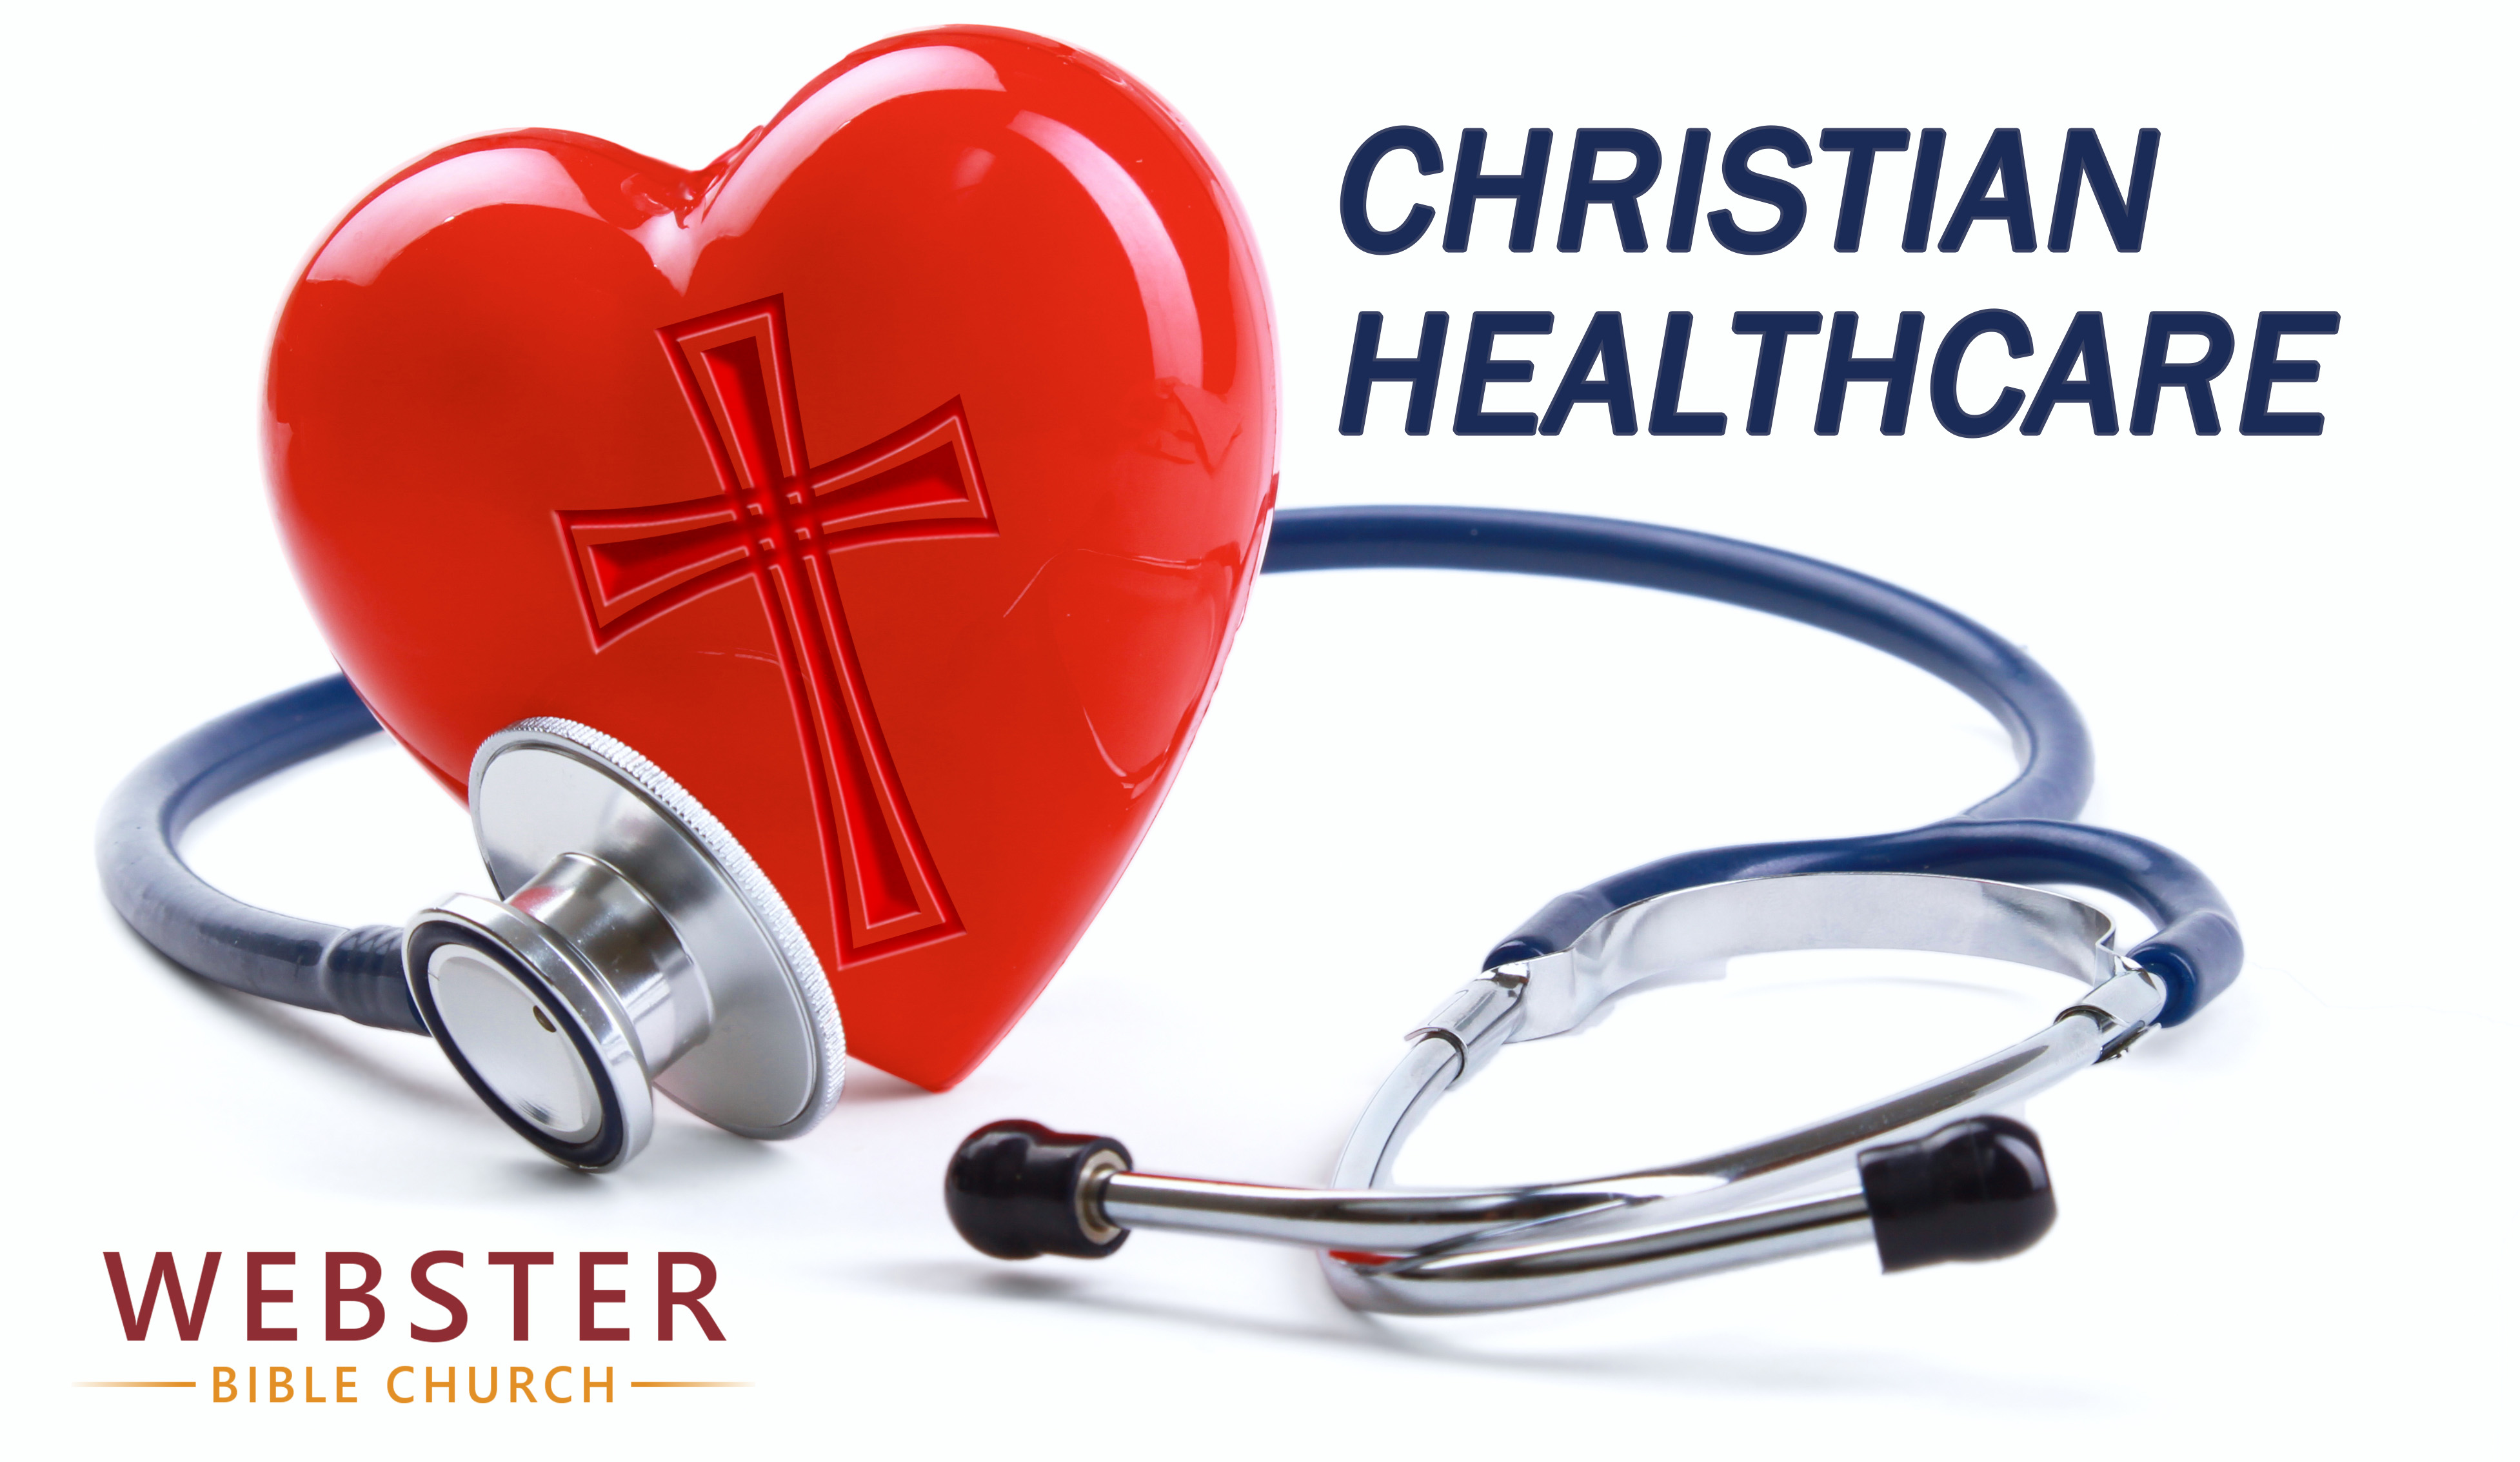 Christian Healthcare - Diagnostic Question #2: Are You Governed Increasingly By God's Word?